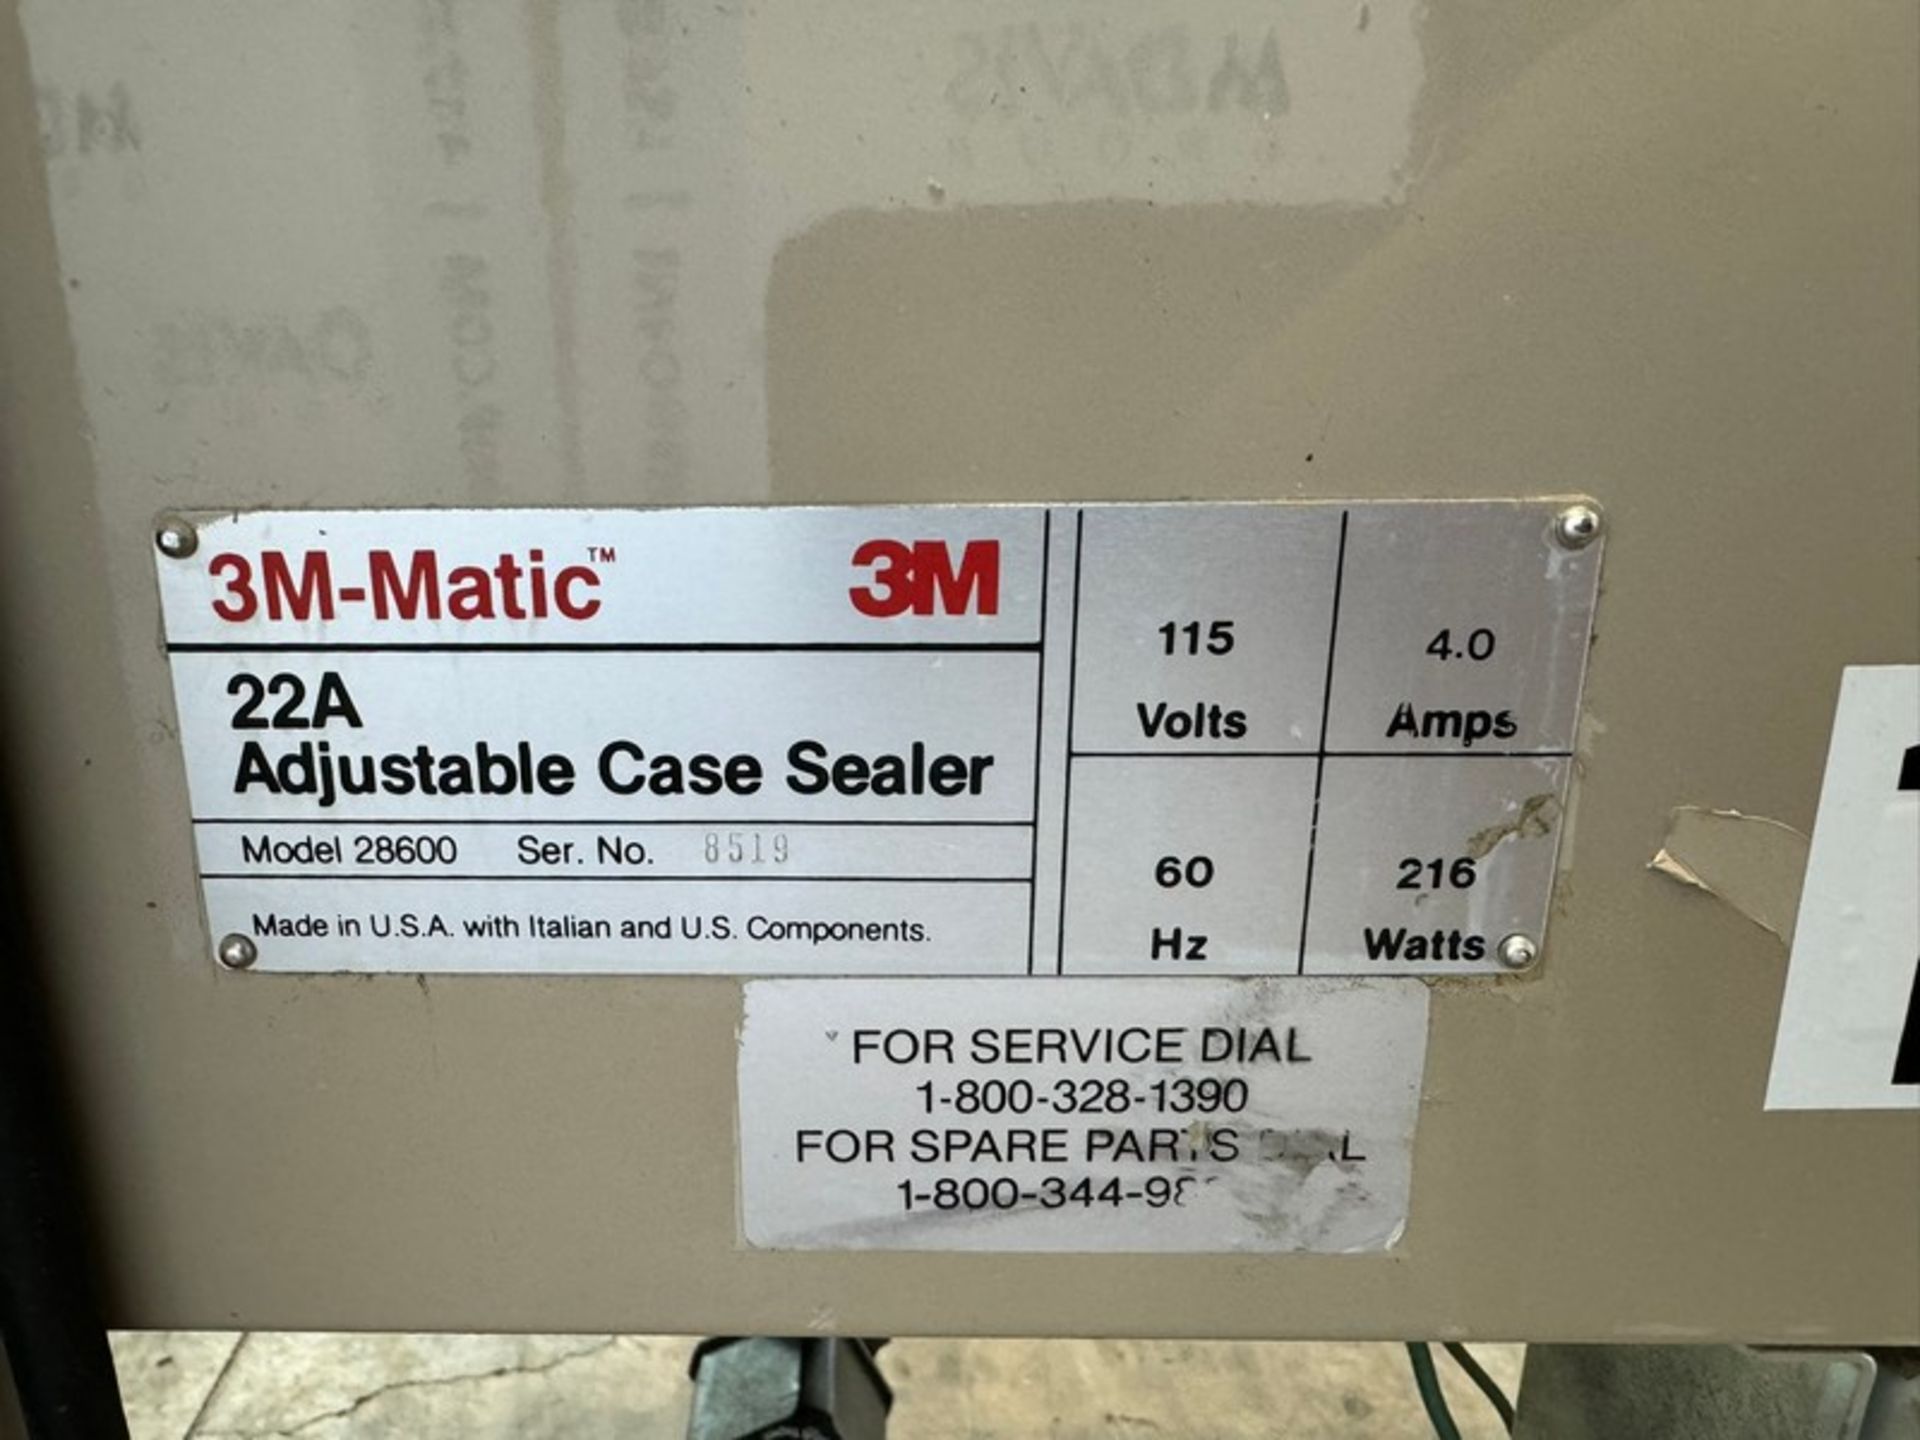 3M-Matic Top & Bottom Adjustable Case Sealer, M/N 28600, S/N 8519, 115 Volts, with Top & Bottom Tape - Image 5 of 6